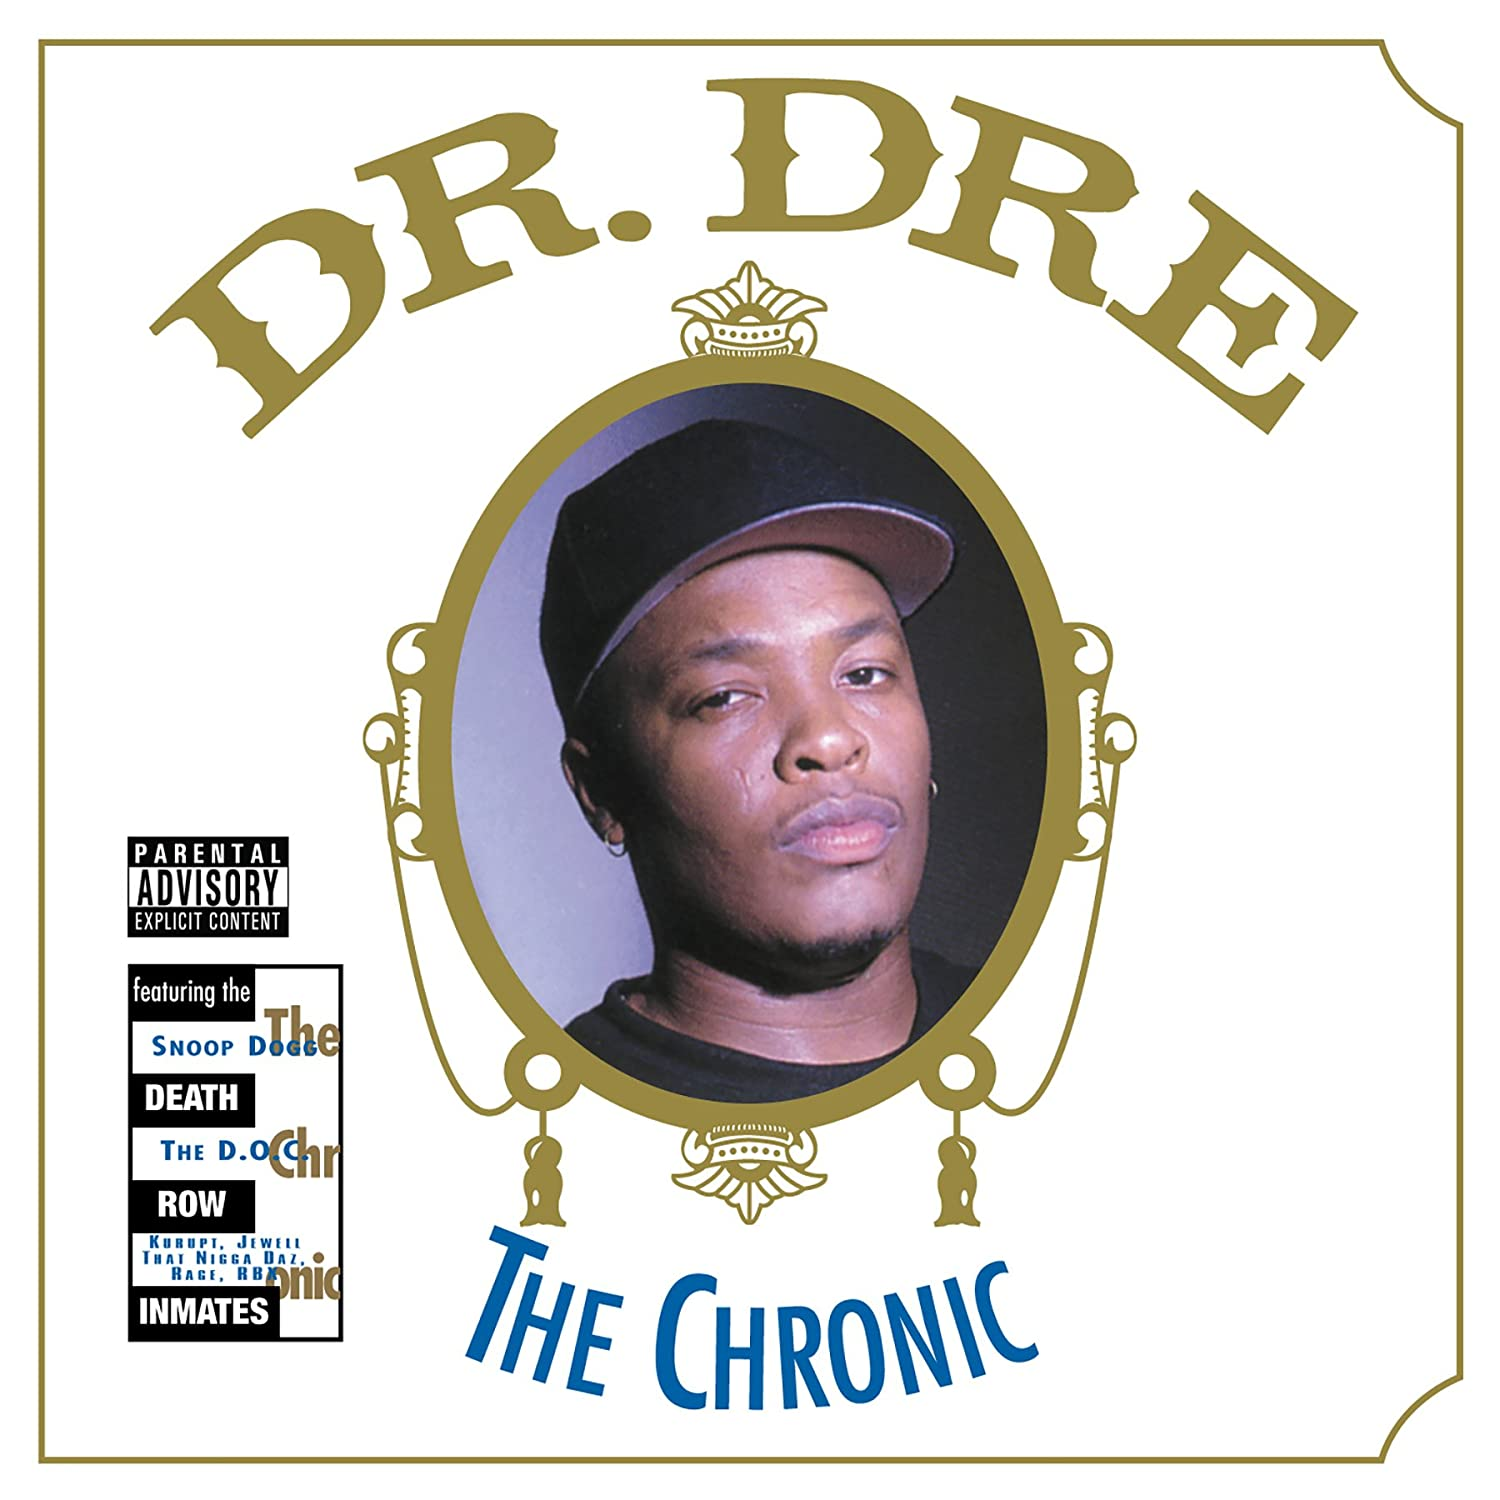 Dr. Dre ft Snoop Dogg - Nuthin But A G Thang (Remix)